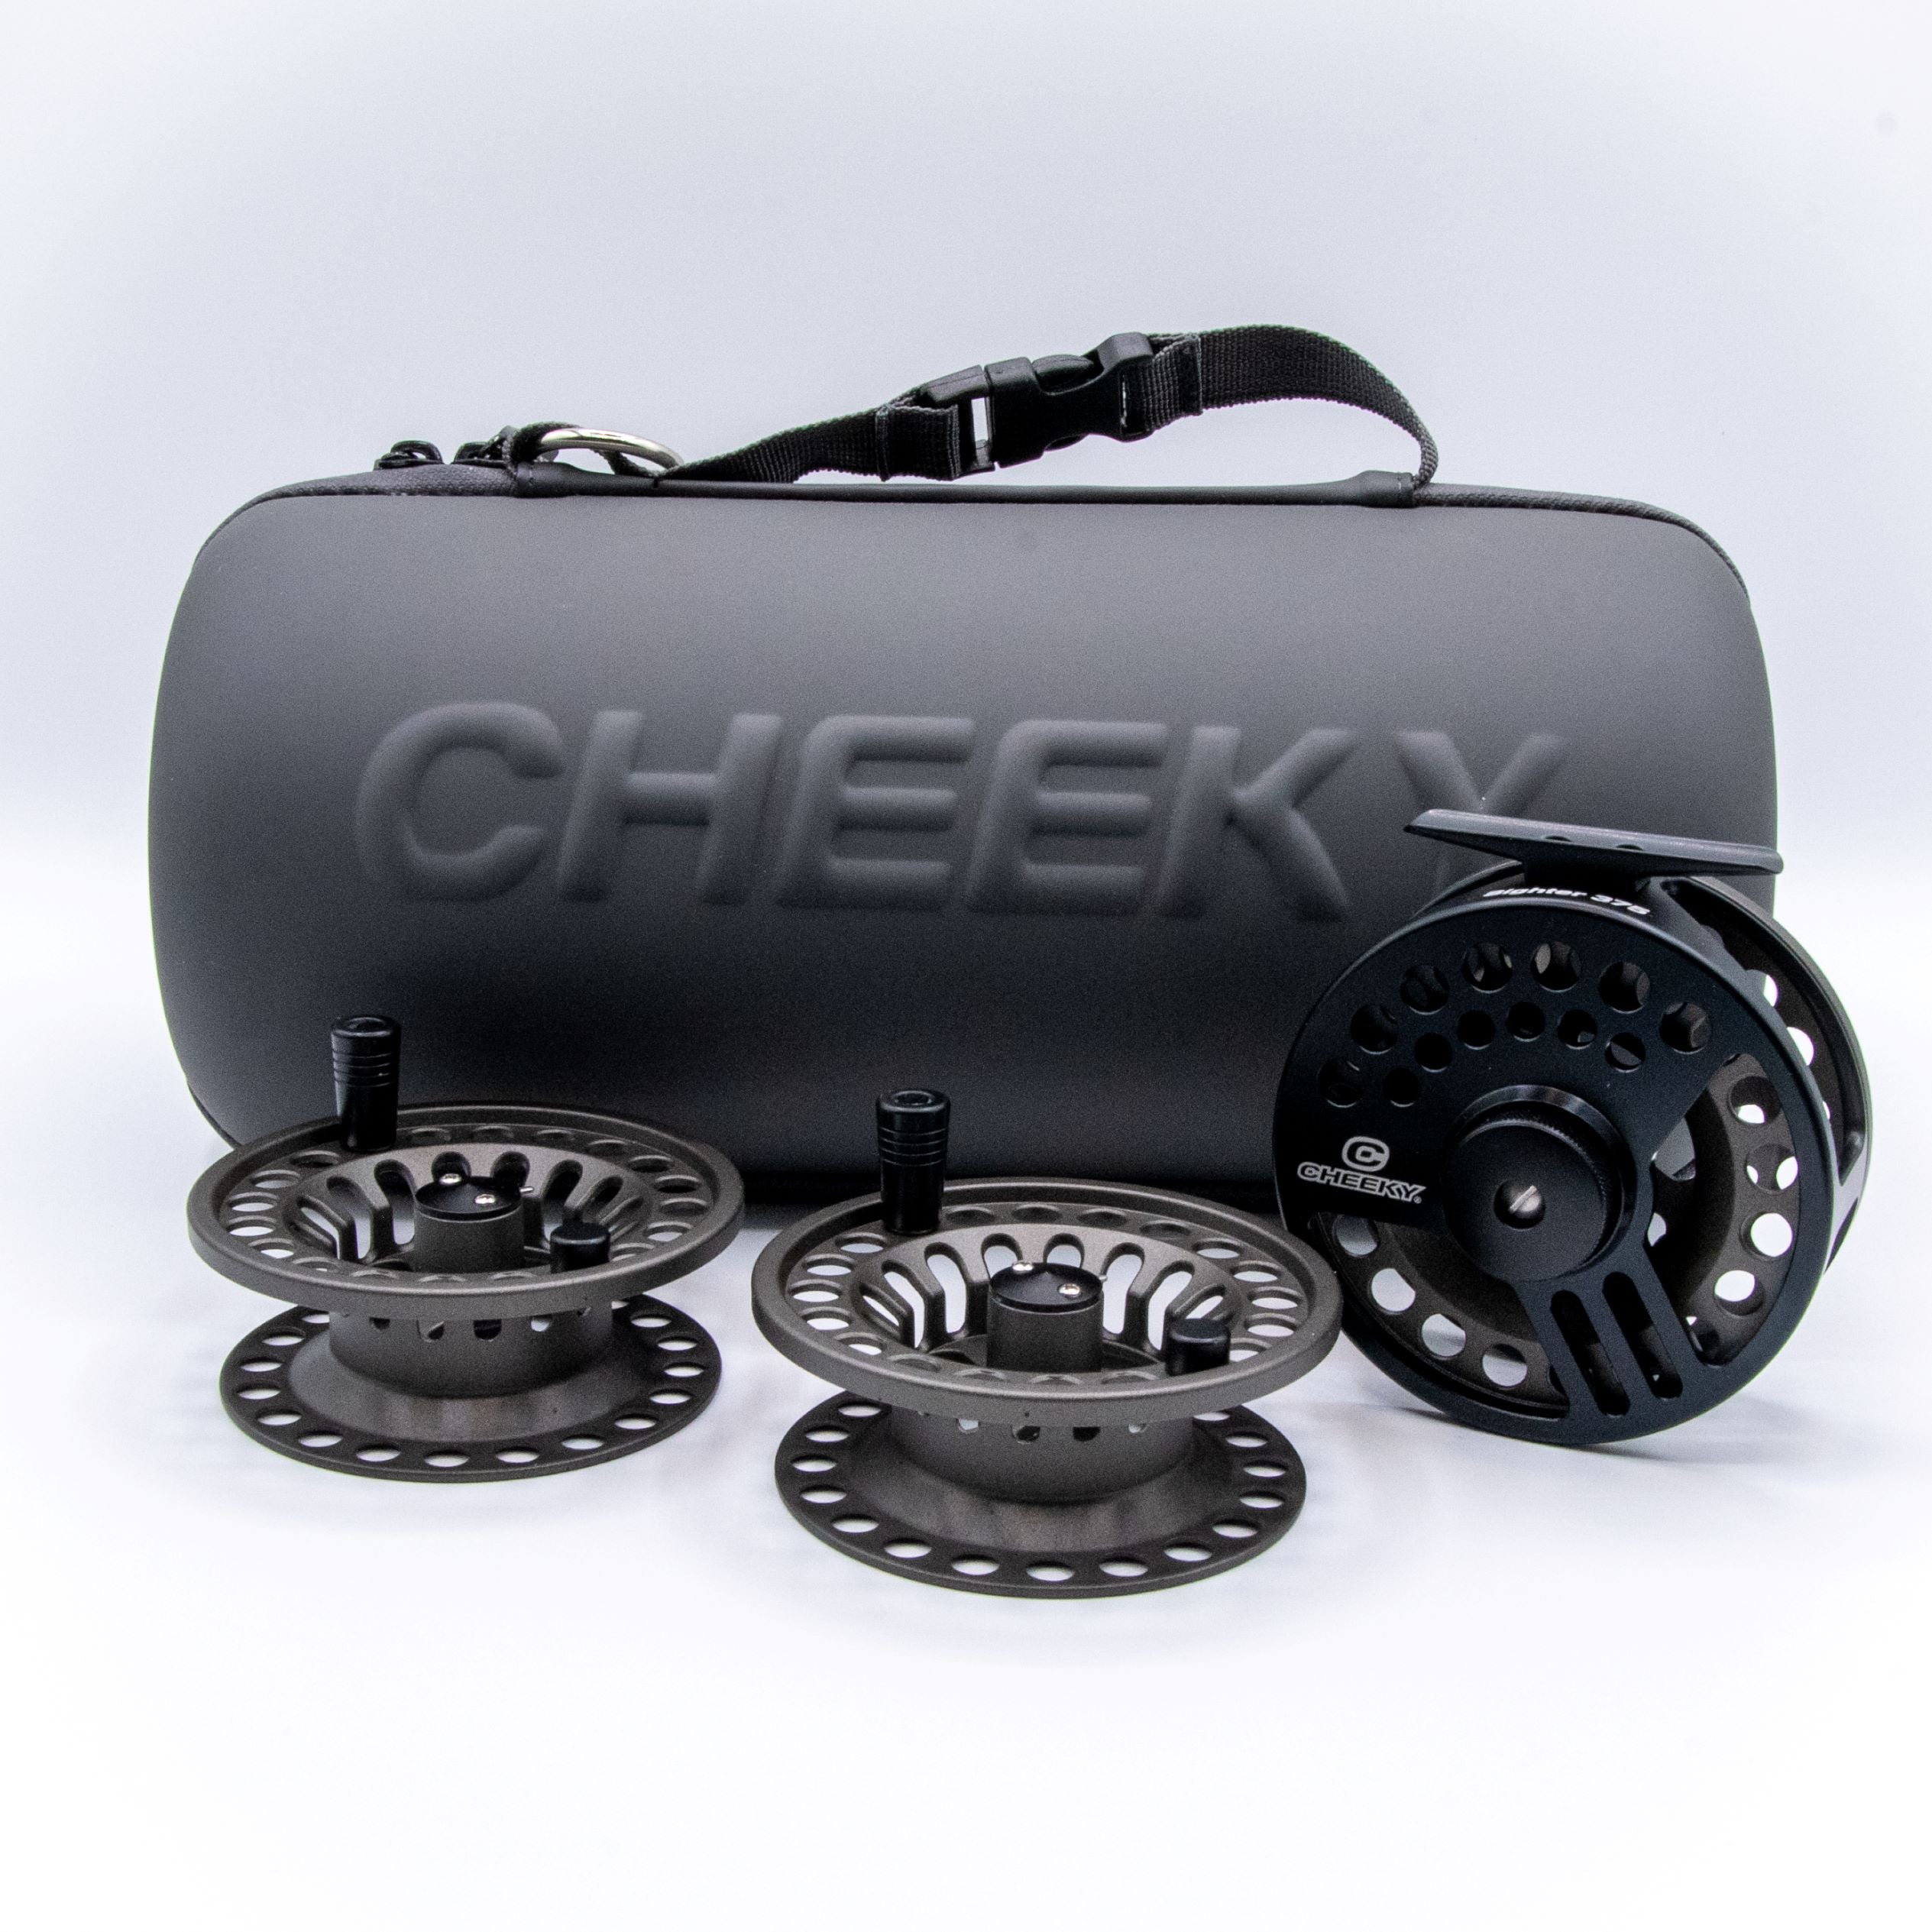 Original Cheeky® Tyro Fly Reel Discount Designs at a Steal